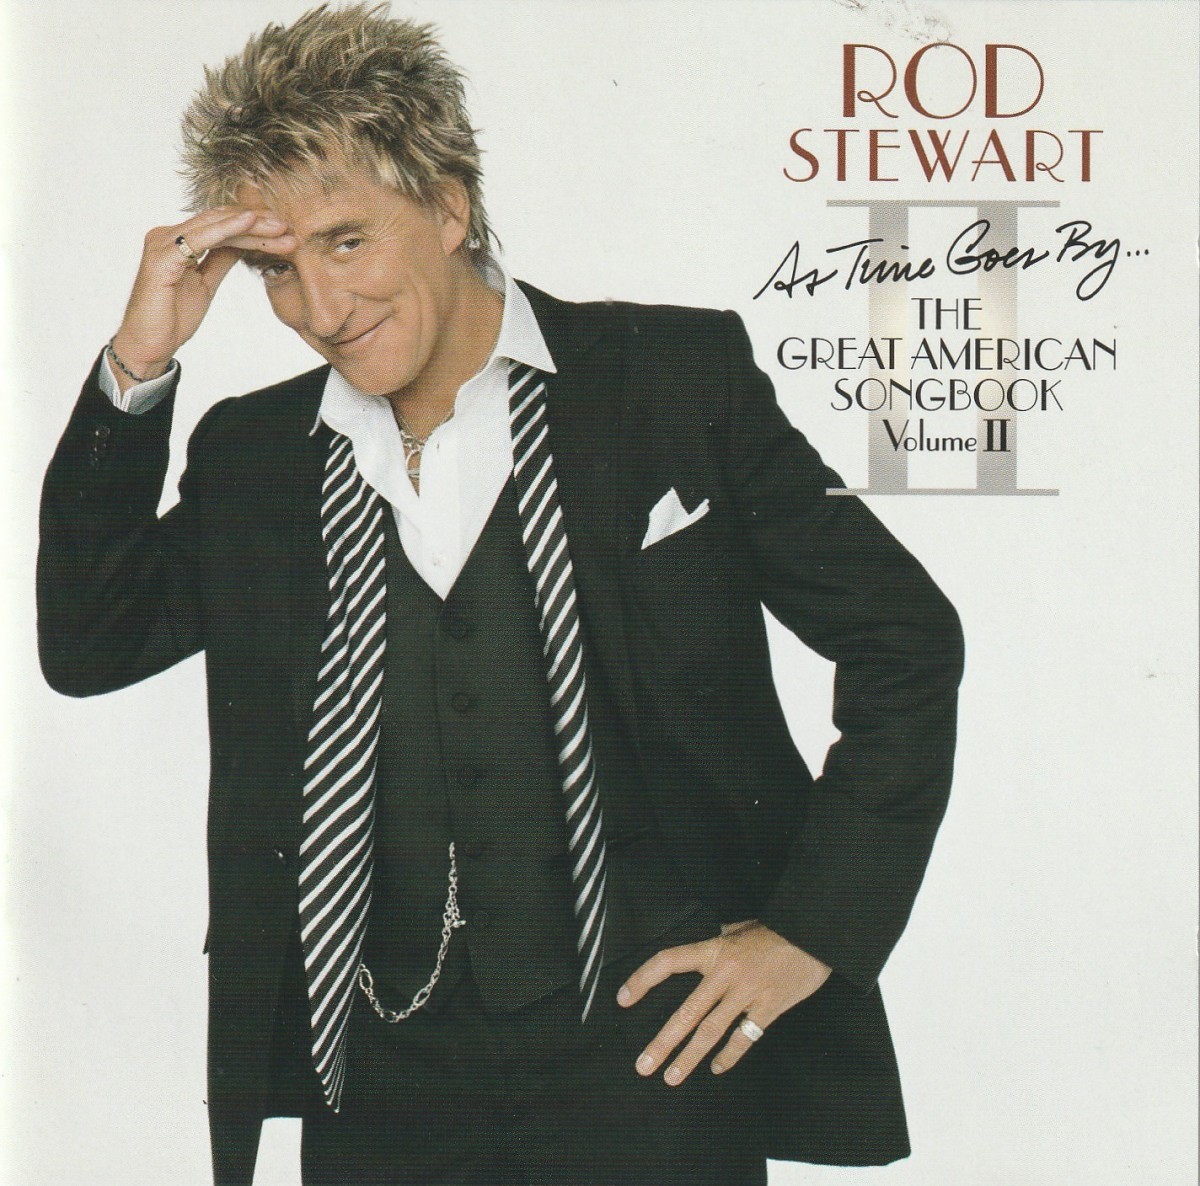 【CD】ROD STEWART/AS TIME GOES BY THE GREAT AMERICAN SONGBOOK VOLUME Ⅱ_画像1